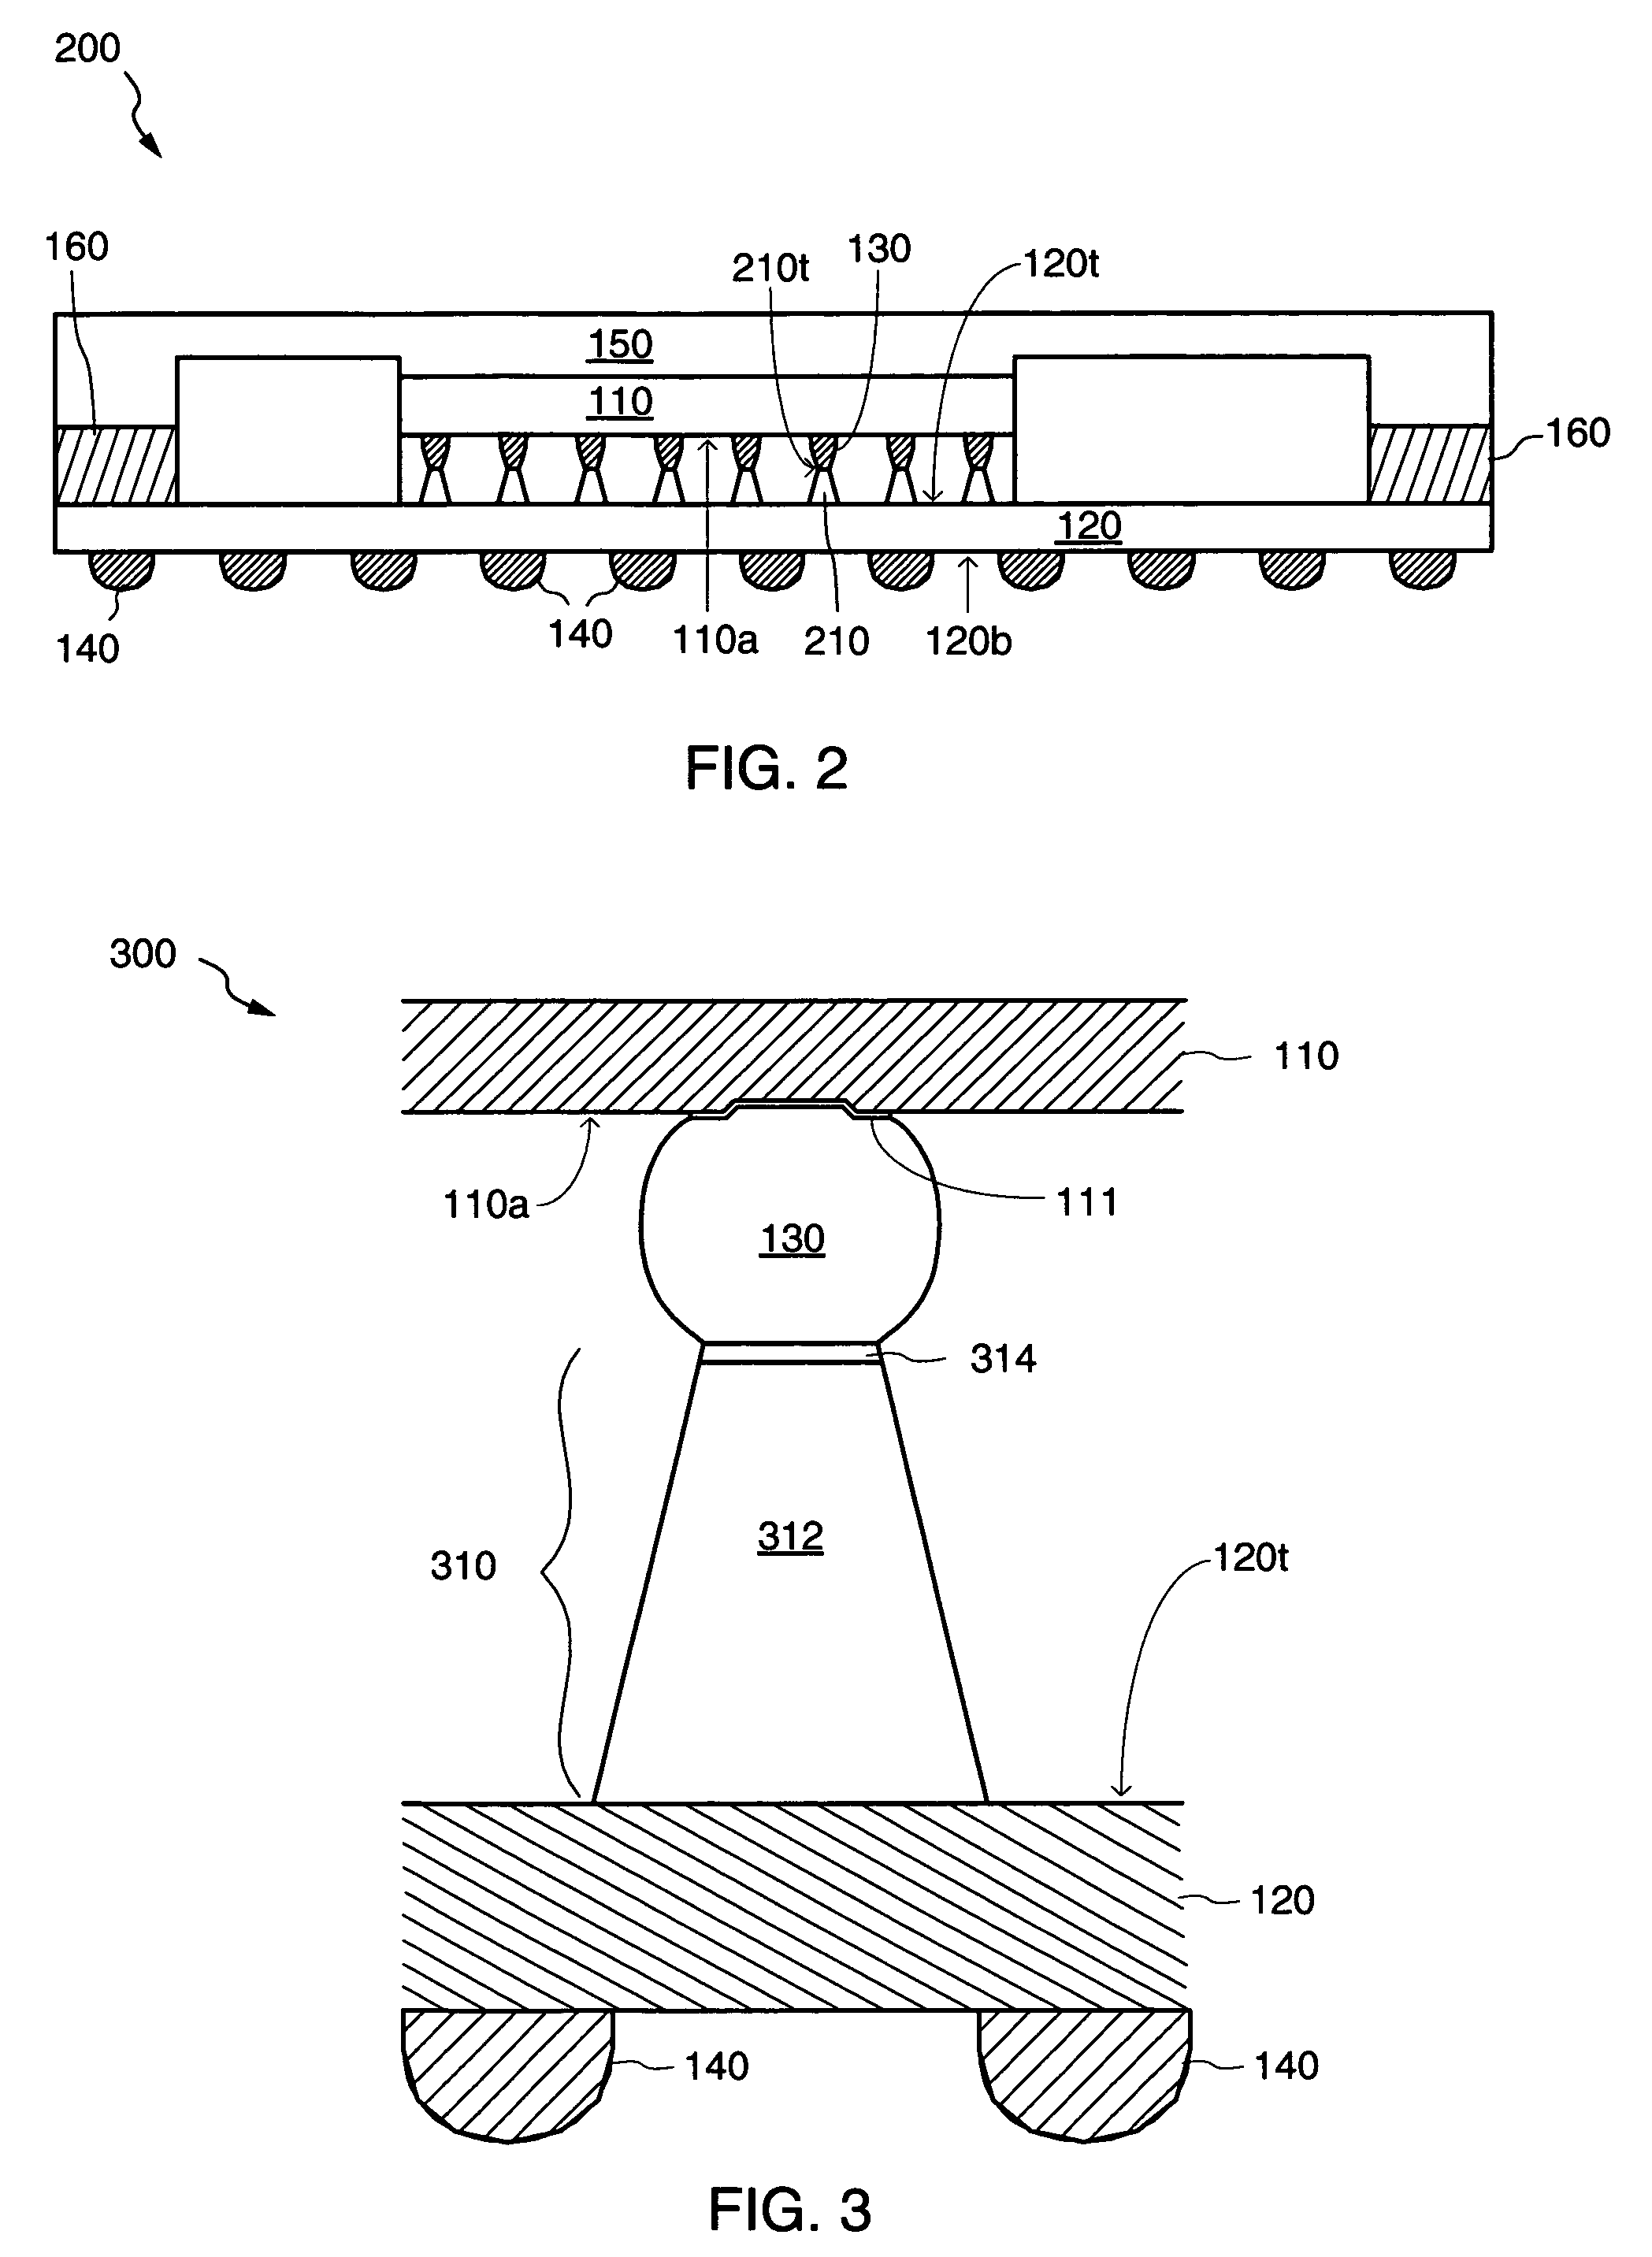 Flip-chip package having thermal expansion posts